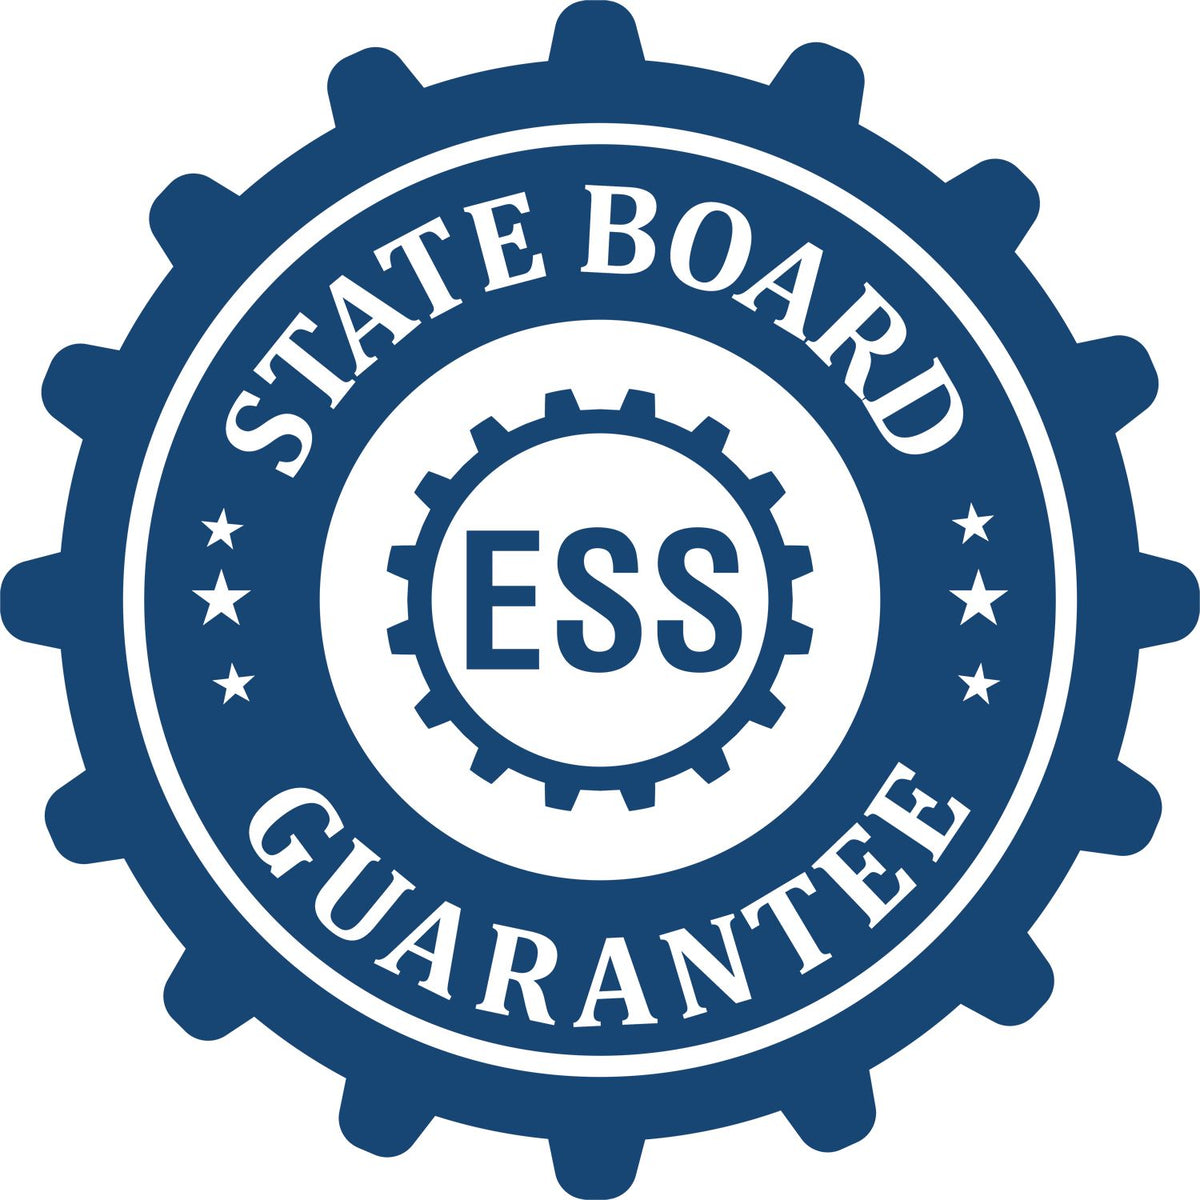 An emblem in a gear shape illustrating a state board guarantee for the Hybrid Kentucky Landscape Architect Seal